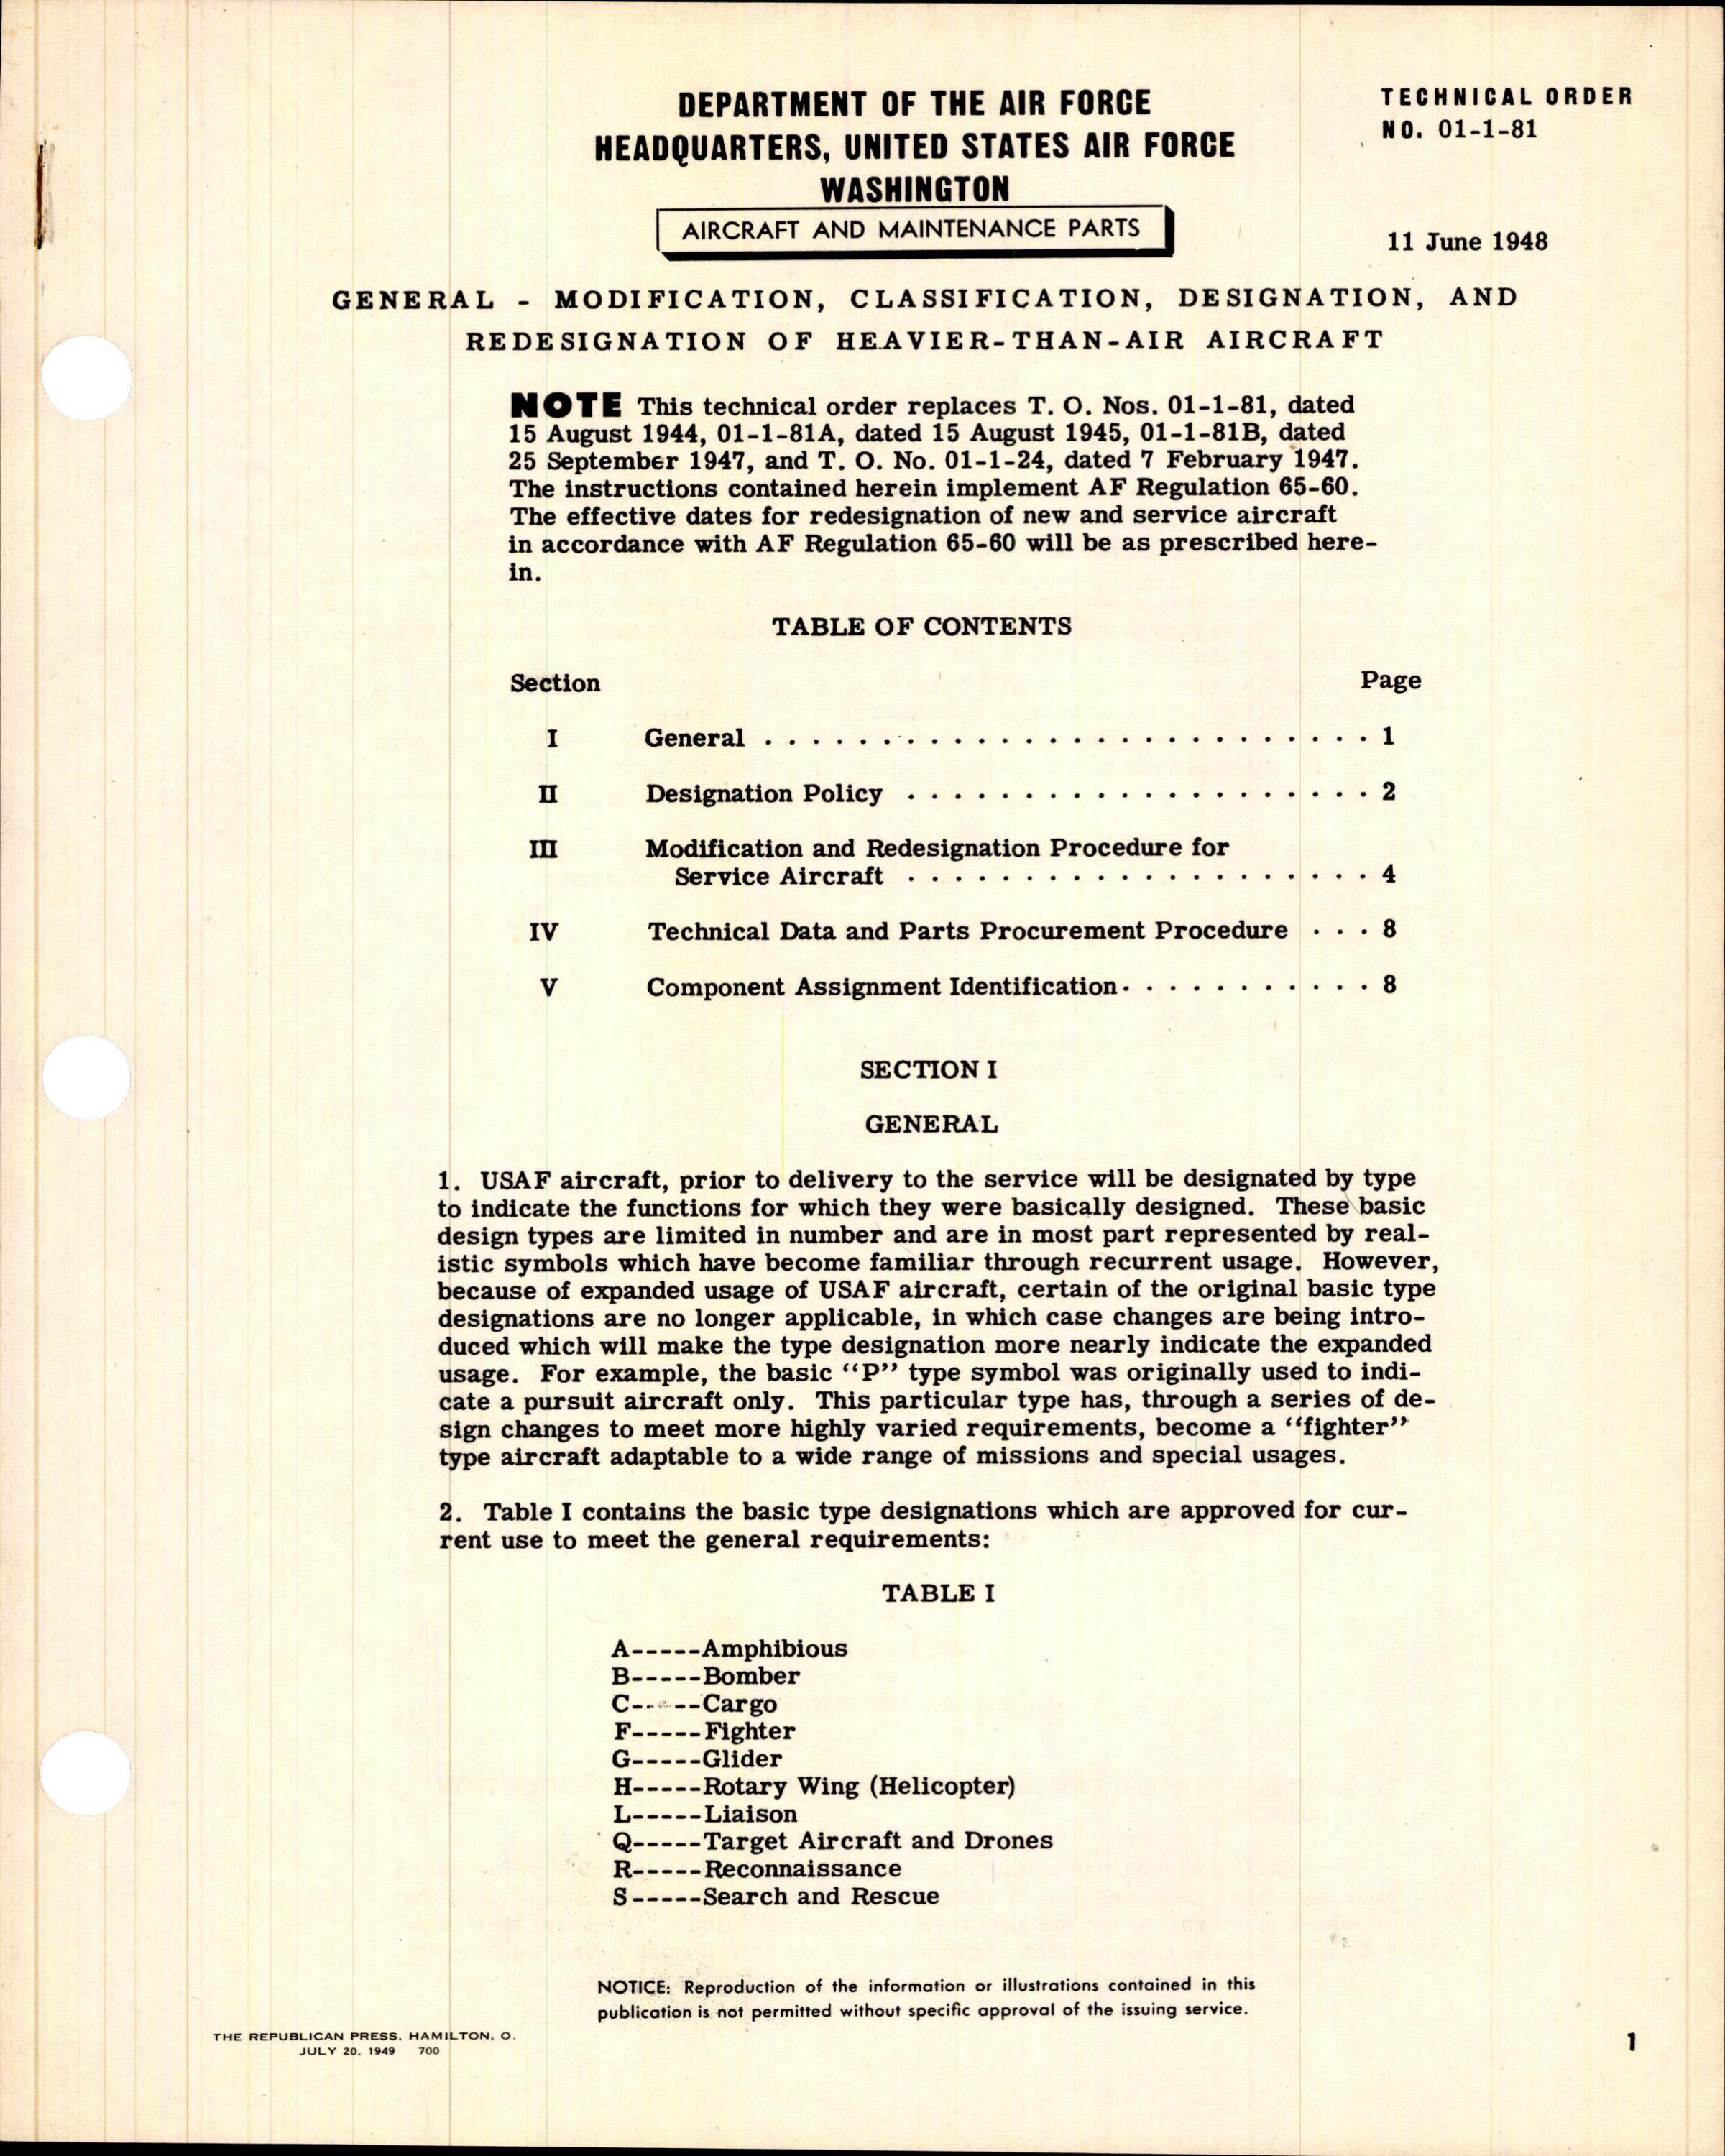 Sample page 1 from AirCorps Library document: Modification, Classification, Designation, and Redesignation of Heavier-Than-Air Aircraft